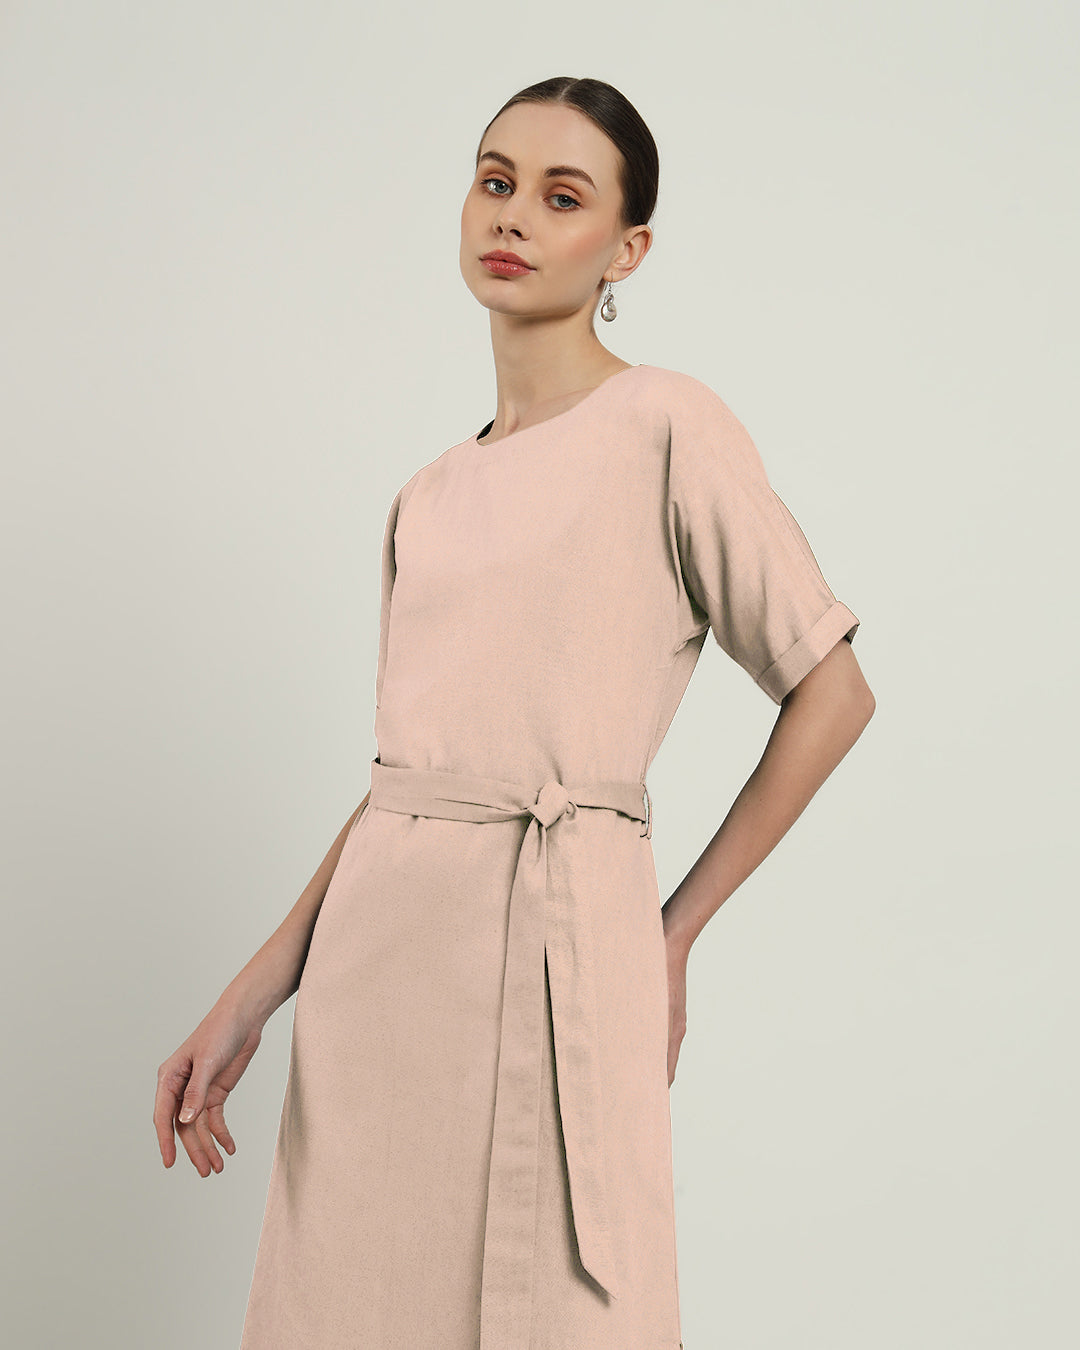 The Tayma Daisy Bisque Linen Dress